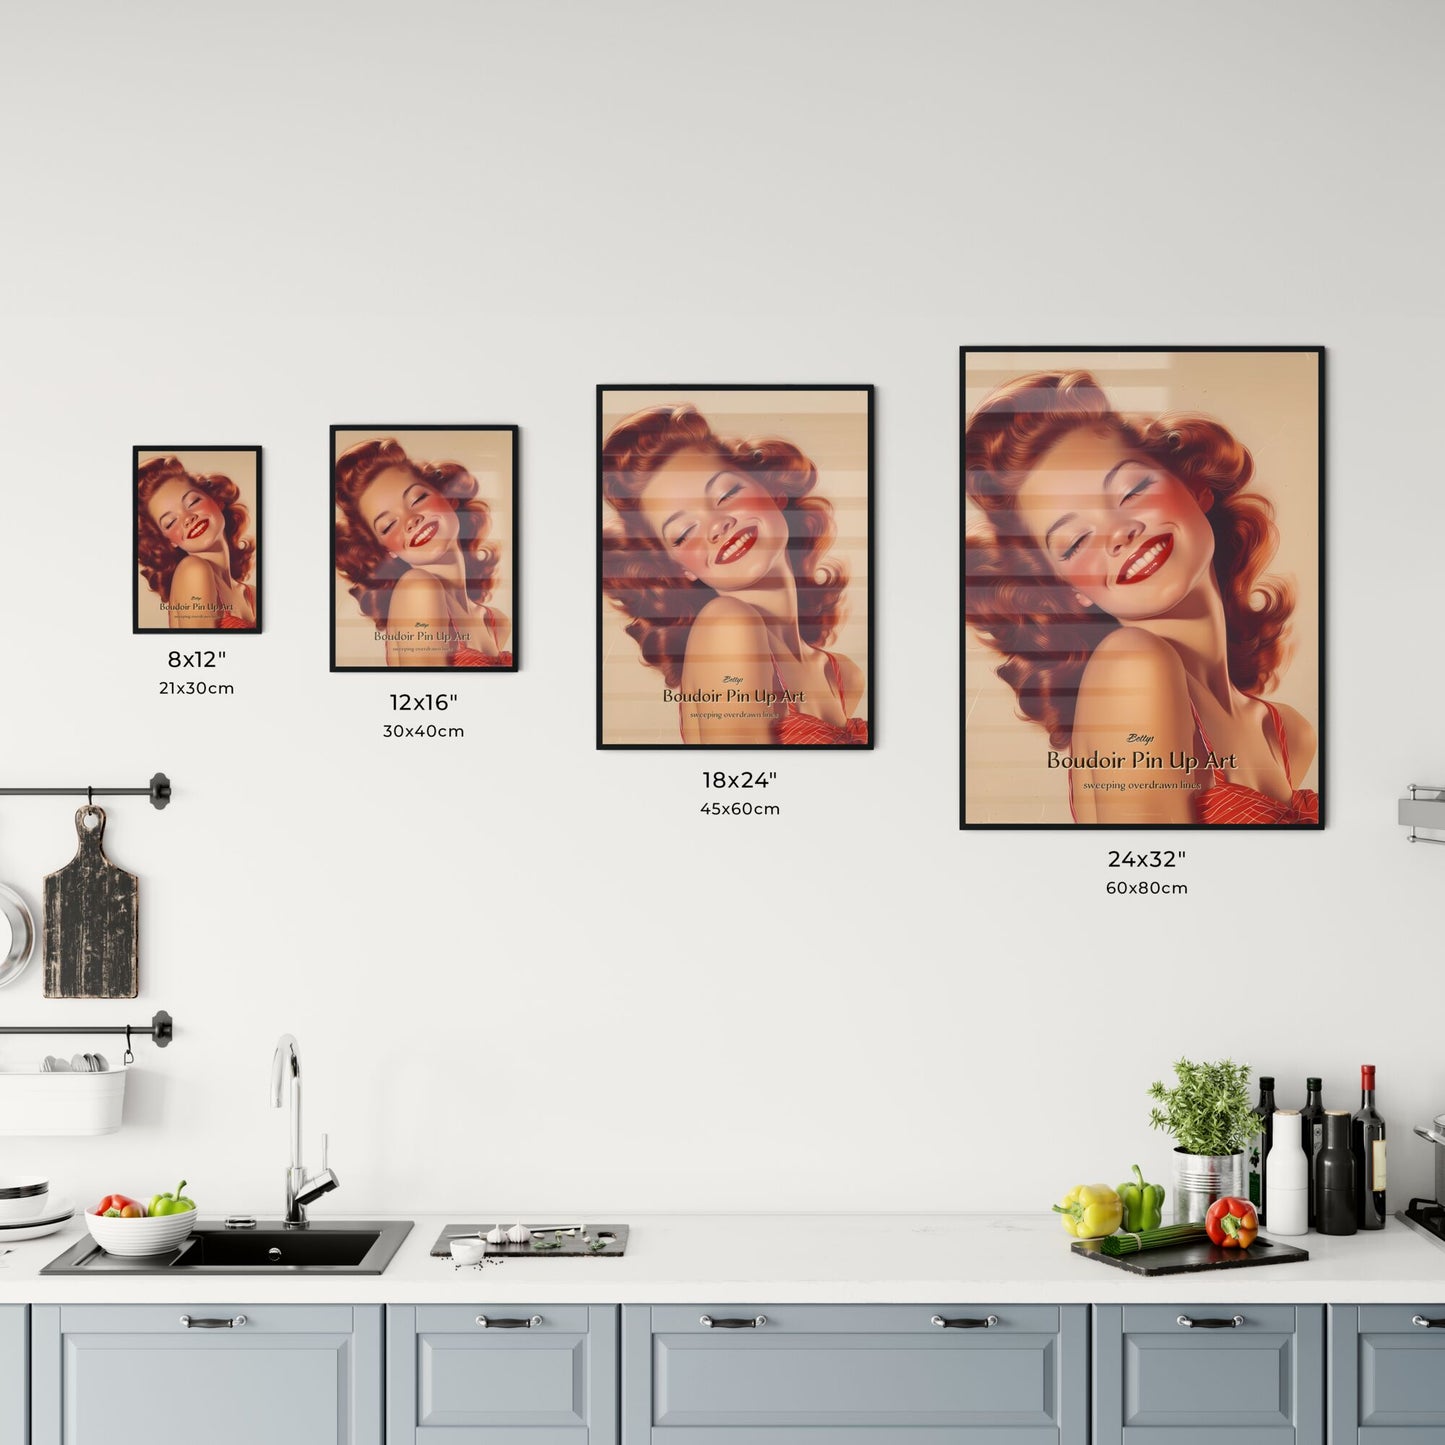 Bettys, Boudoir Pin Up Art, sweeping overdrawn lines, A Poster of a woman with red hair and red lipstick smiling Default Title